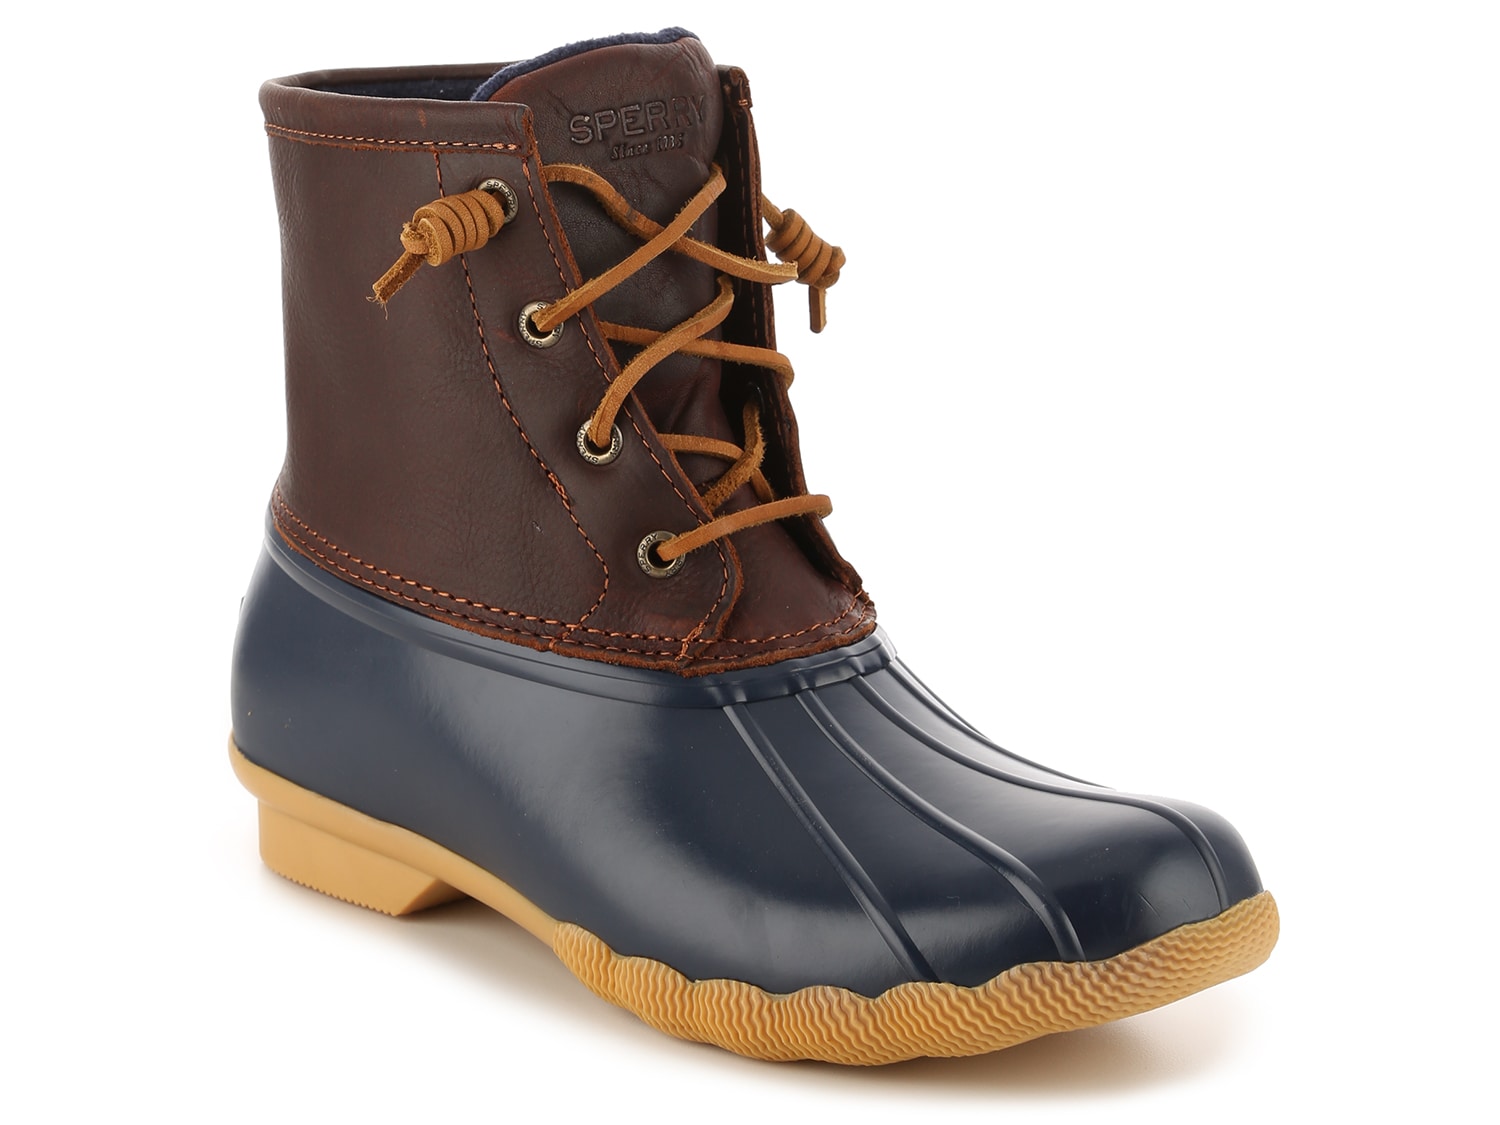 Sperry Saltwater Leather Duck Boot 